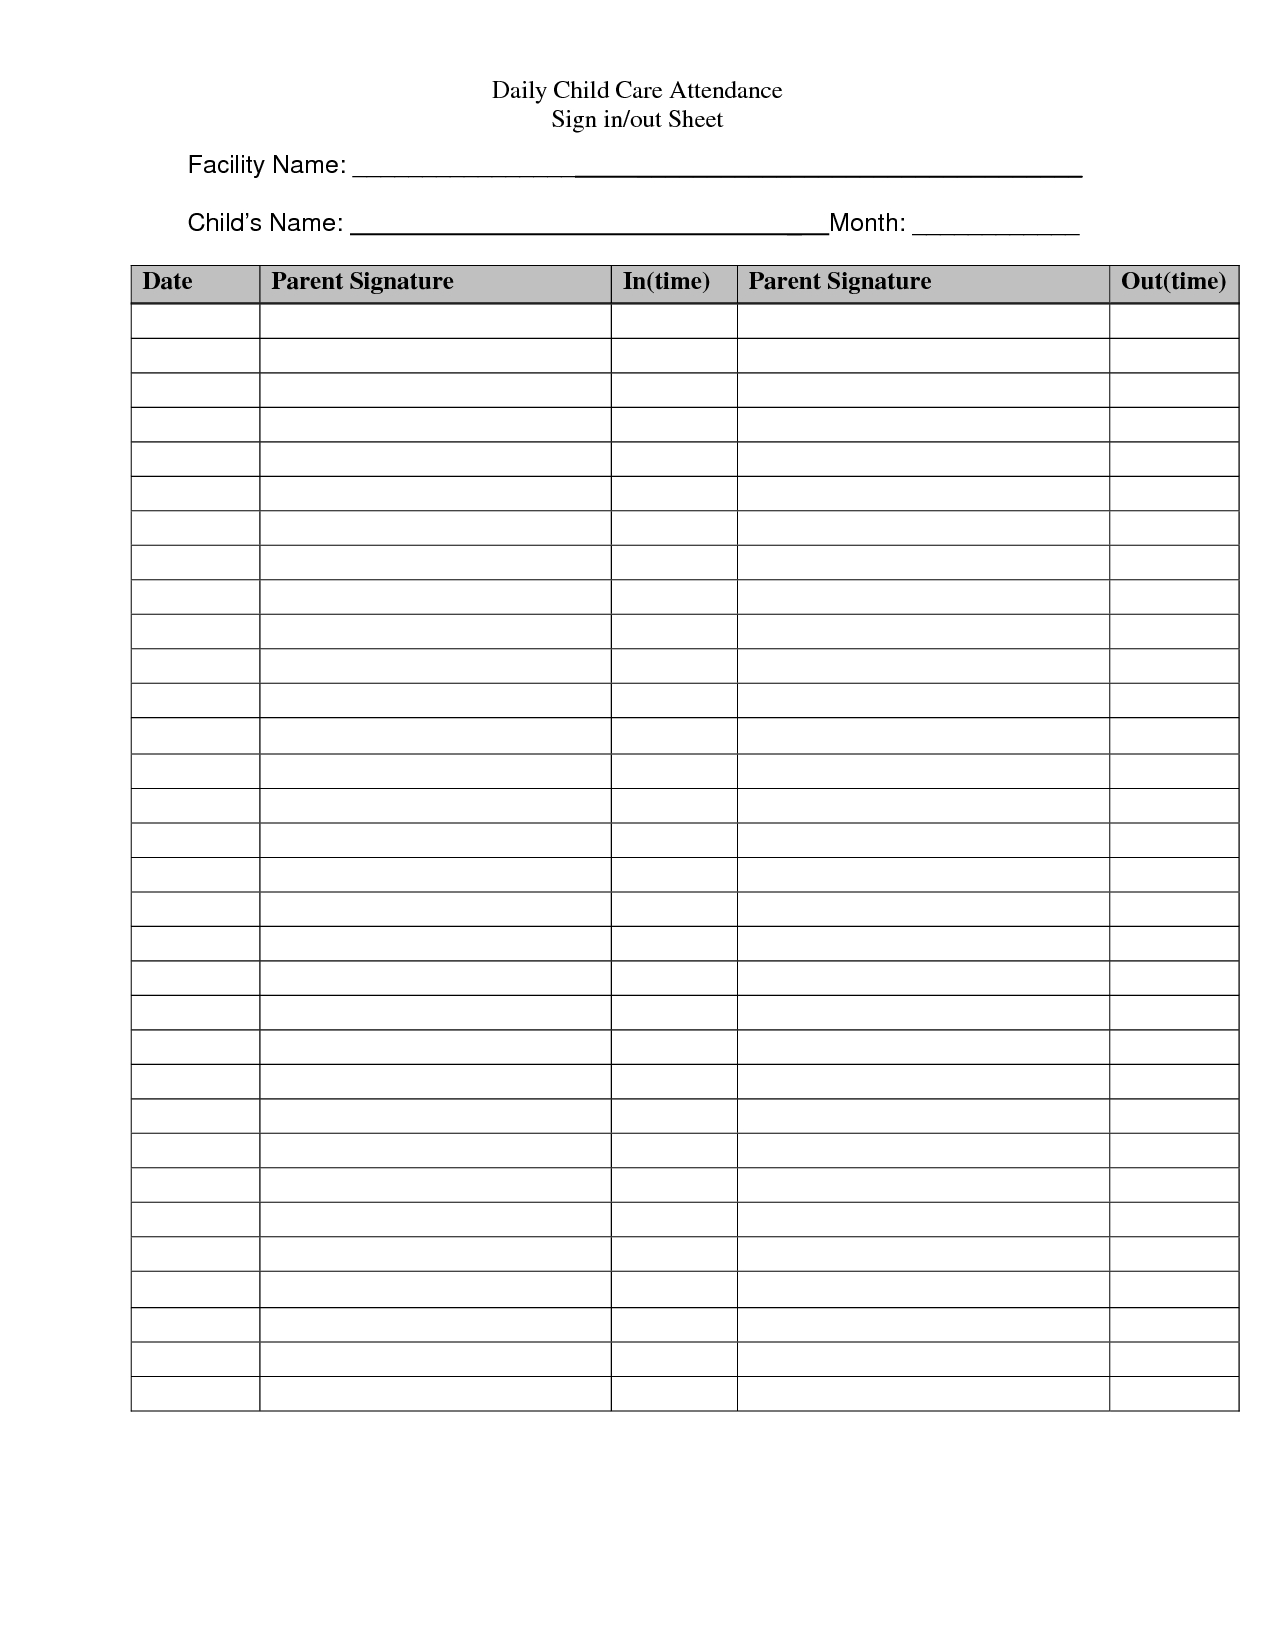 Templates That Are Free For Daycare Signs | Daily Child Care  Day Care Attendance Sheet Template